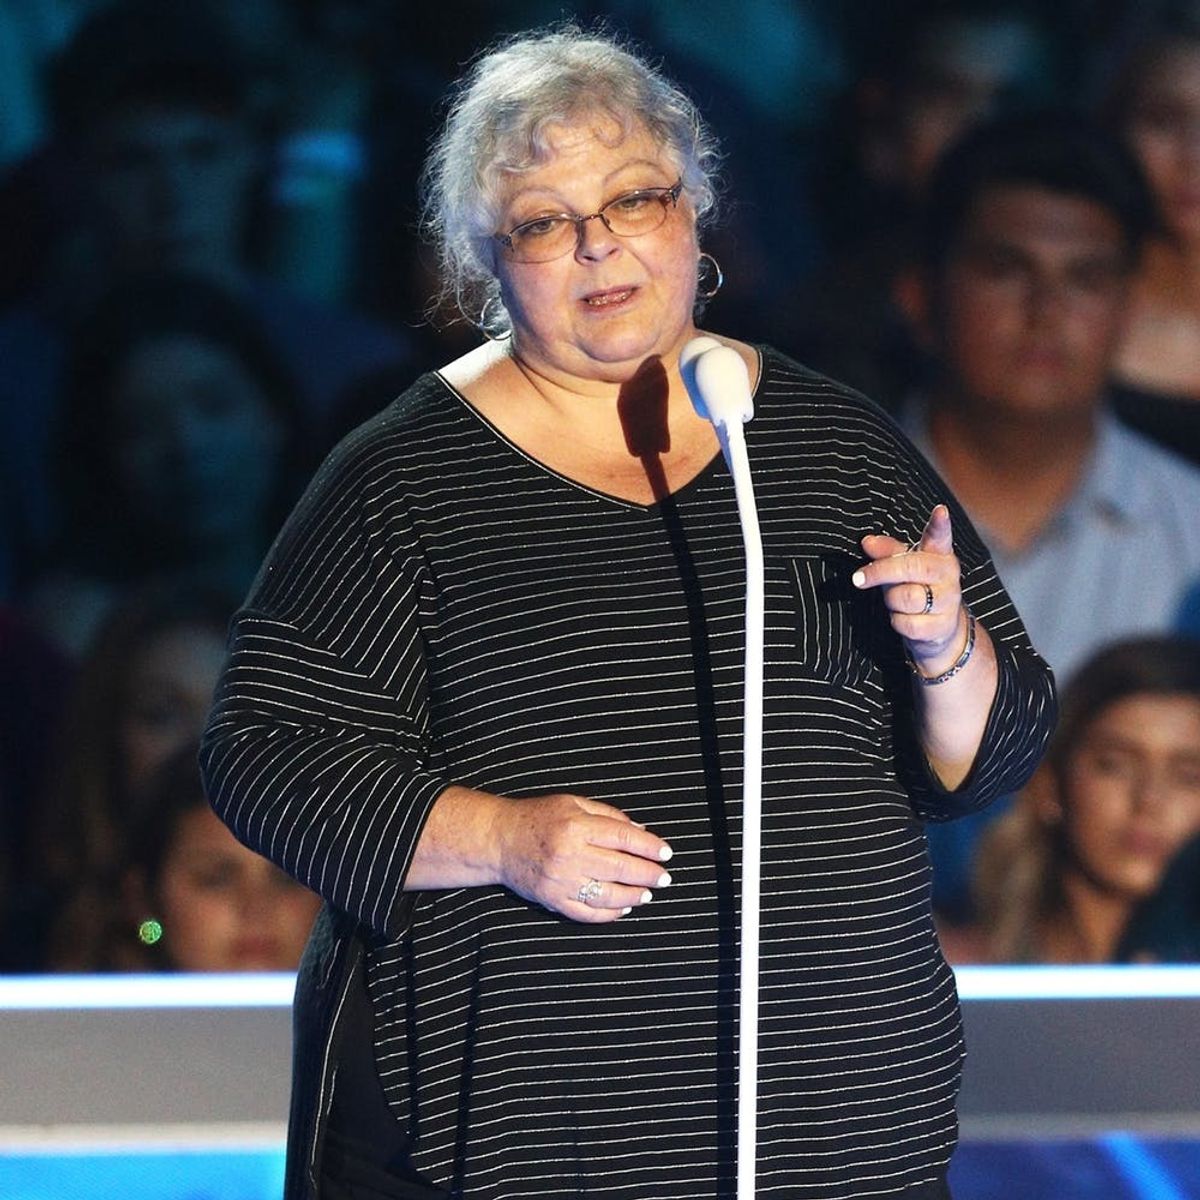 Heather Heyer’s Mother Honors Her Daughter in Moving Appearance at the 2017 MTV VMAs